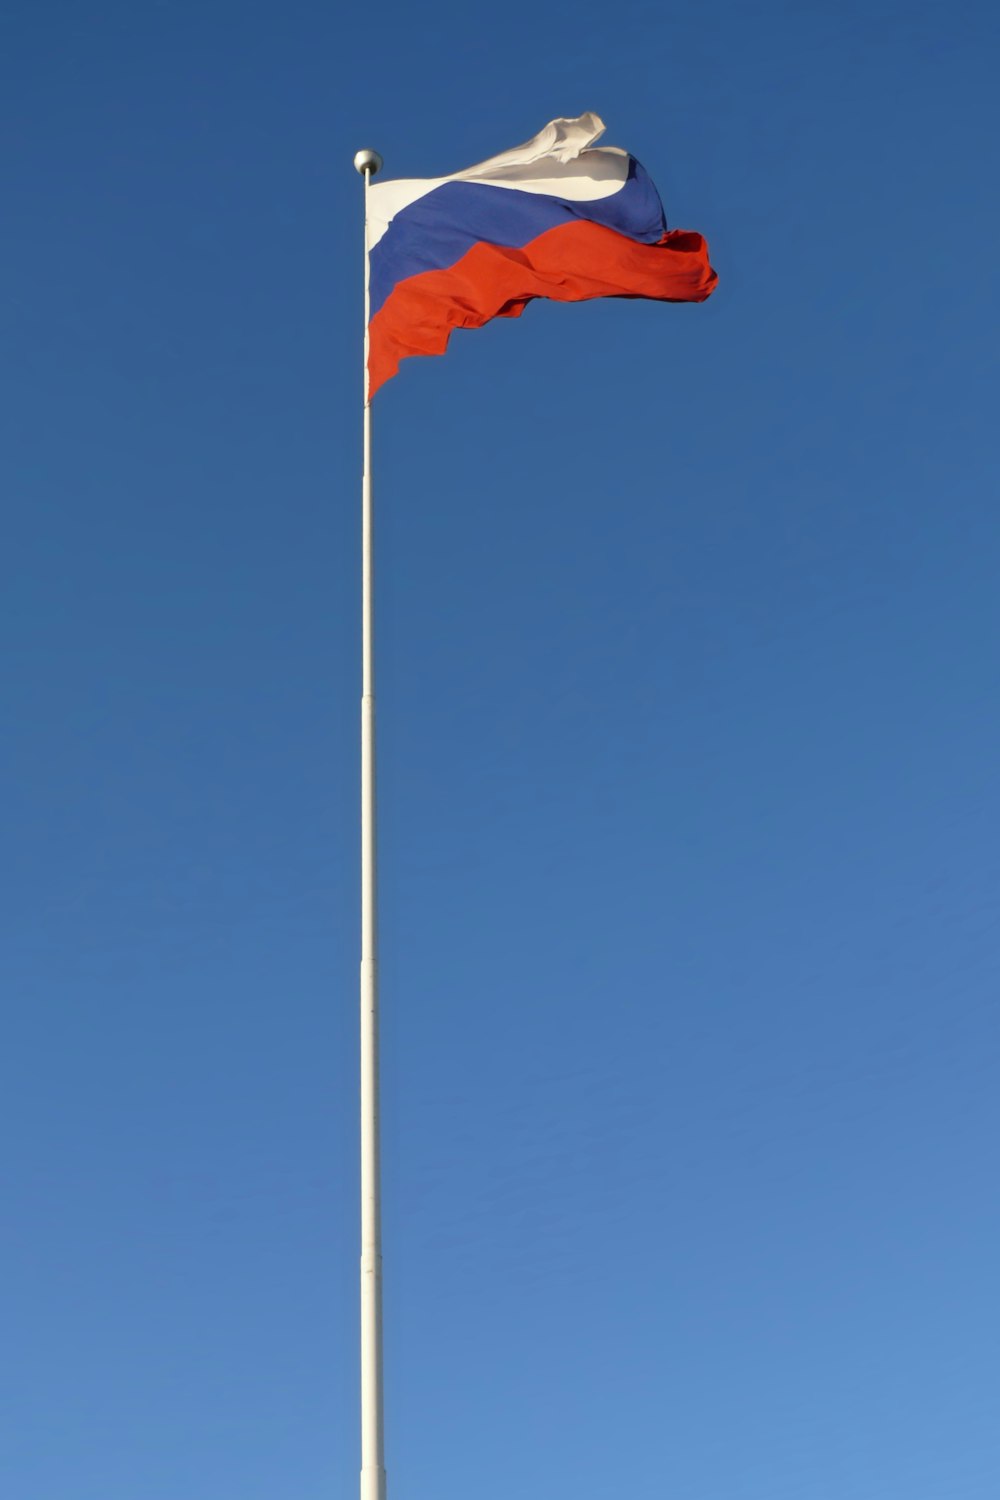 a flag is flying high in the blue sky